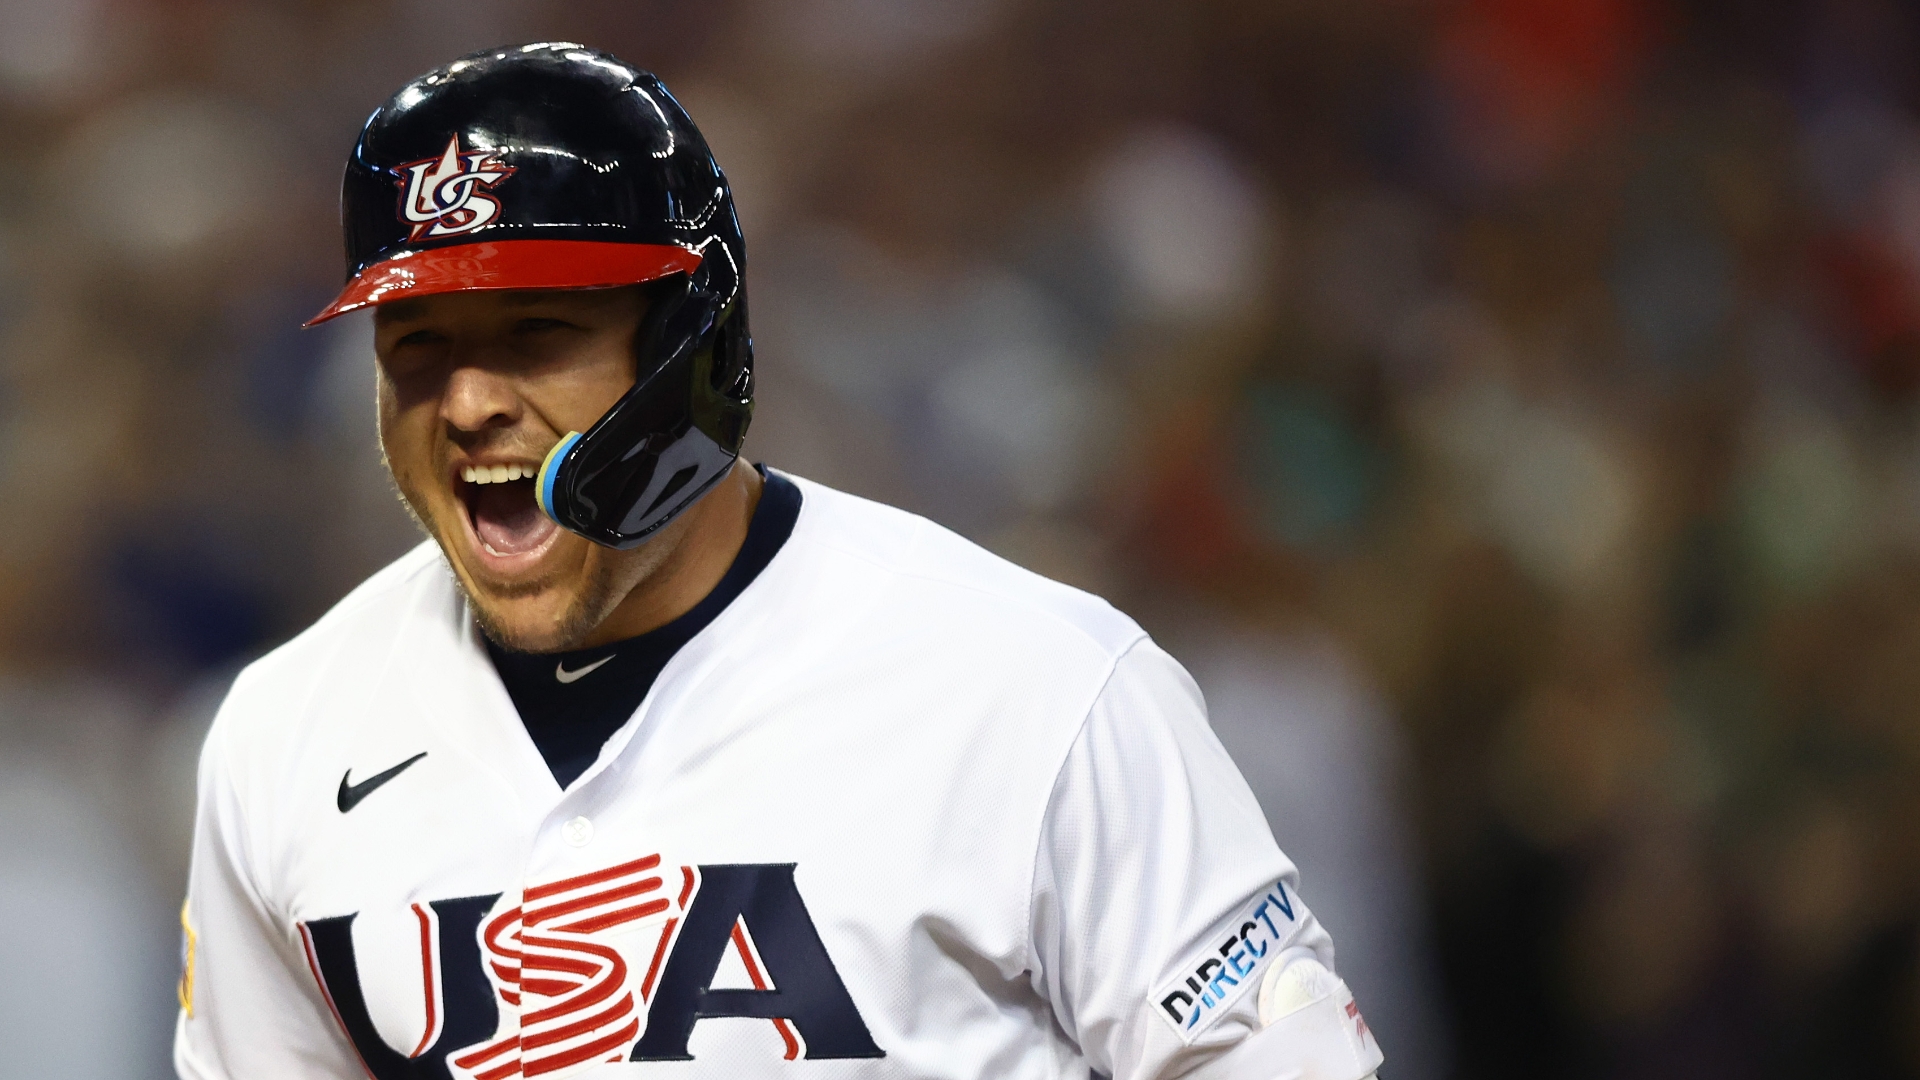 Trout's 3-run dinger caps off 9-run 1st inning for Team USA